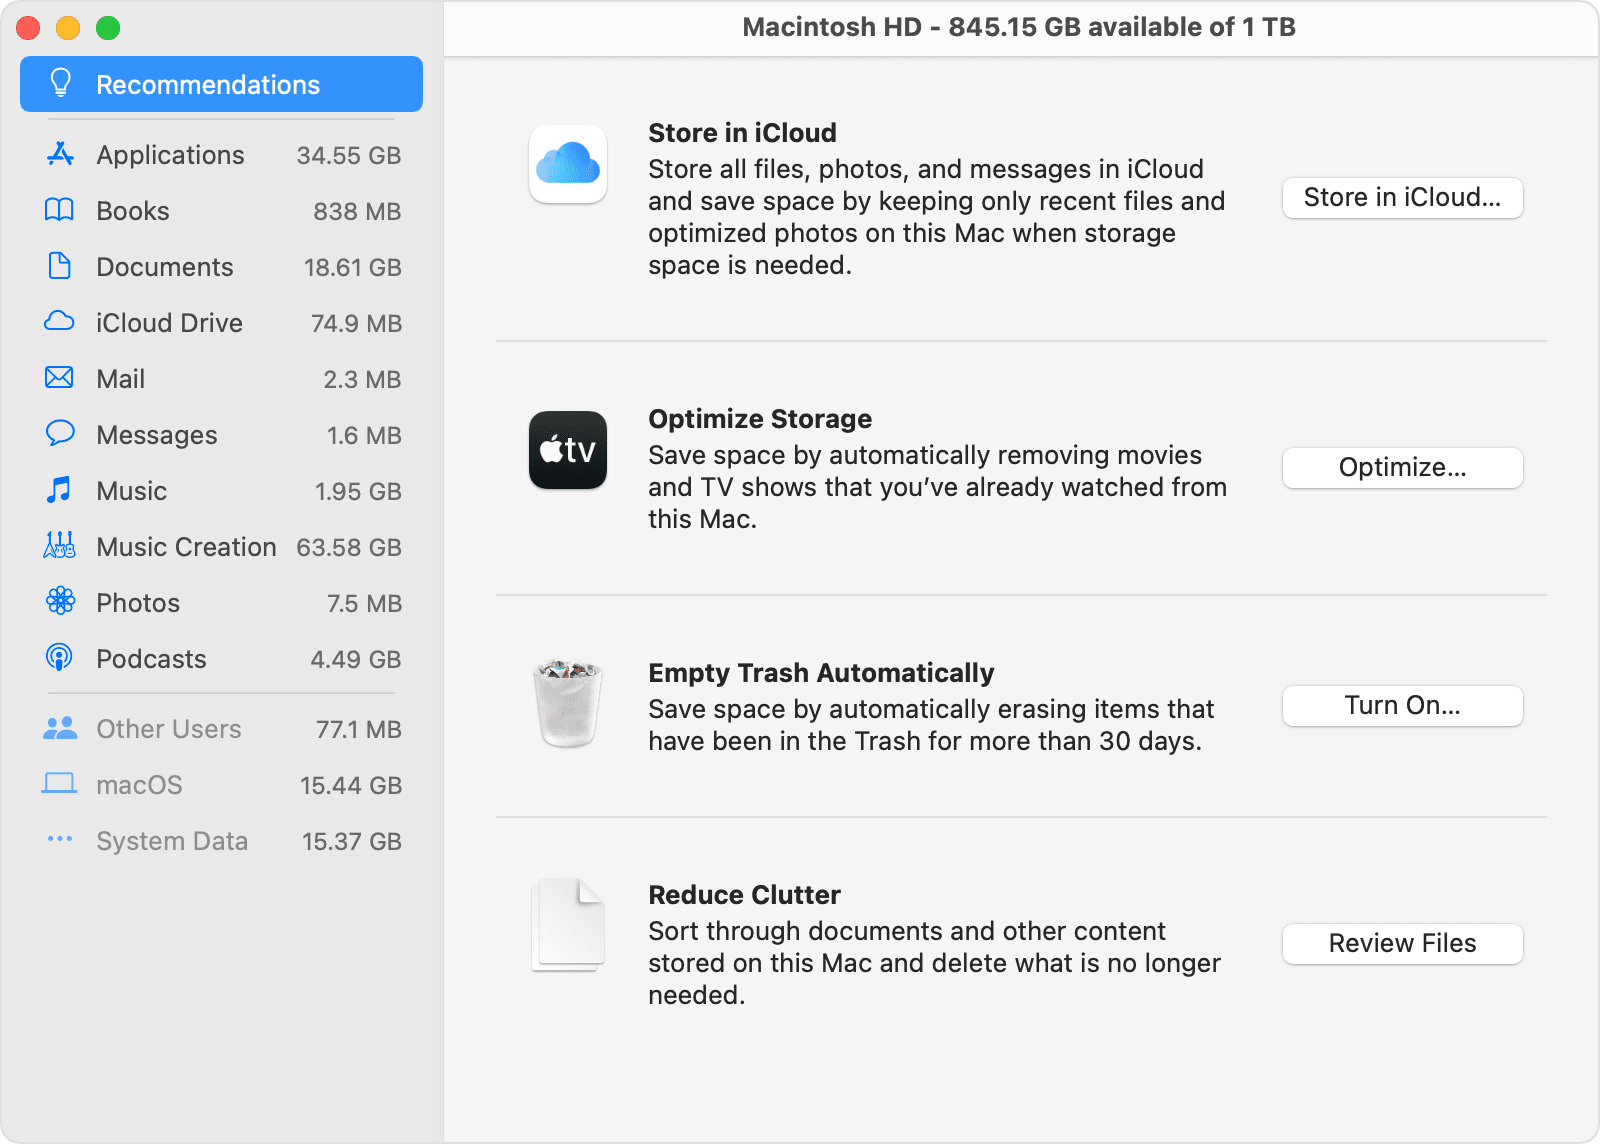 Free up storage space on your Mac - Apple Support